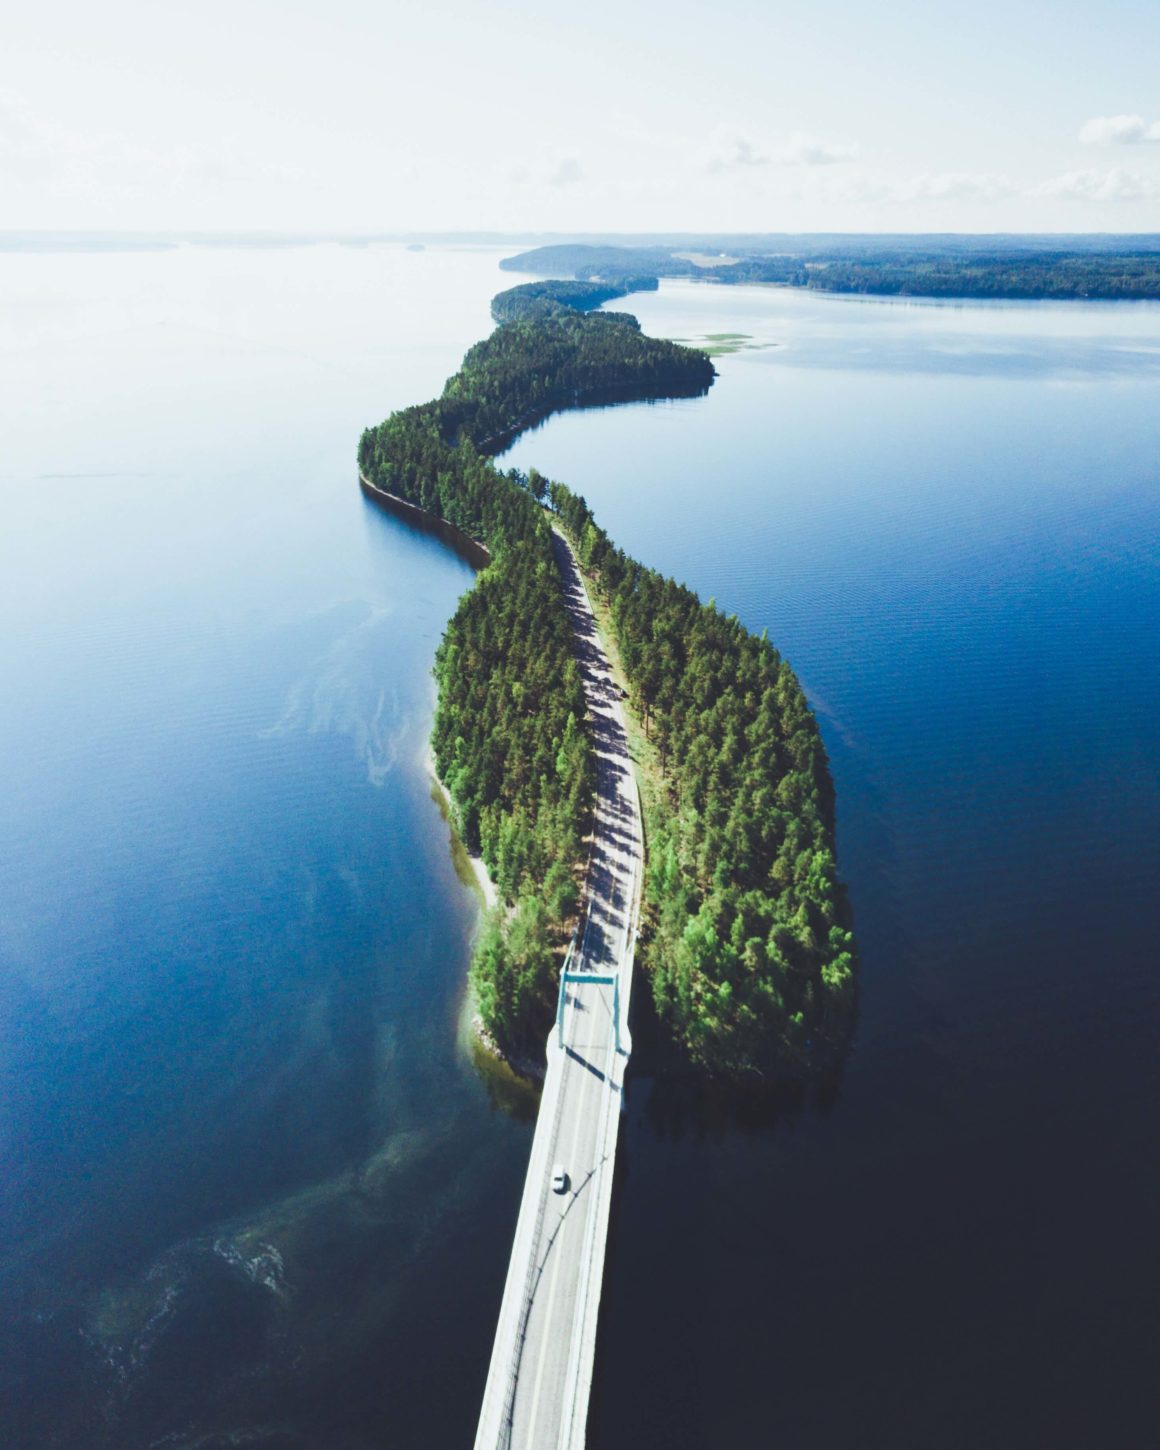 A unique road over water and small islands in Finland